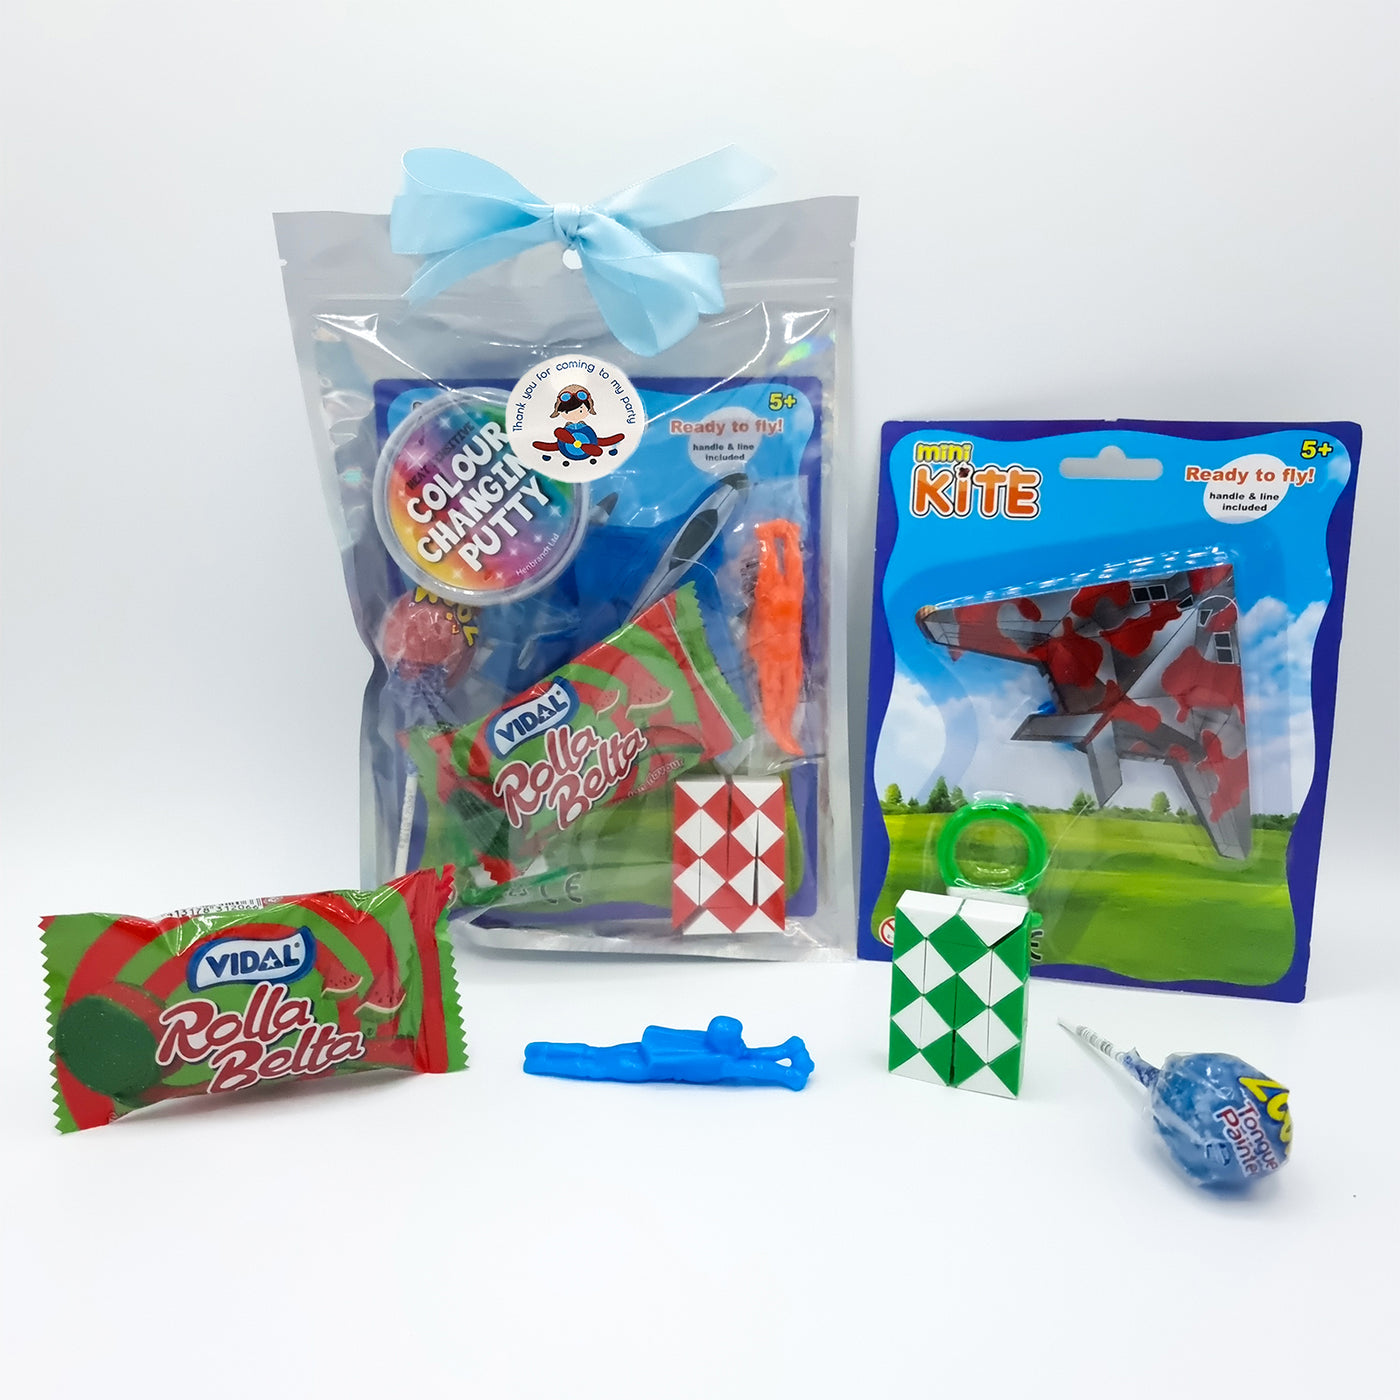 Boys Pre Filled Aeroplane Pilot Party Goody Bags Party Favours With Toys And Sweets.